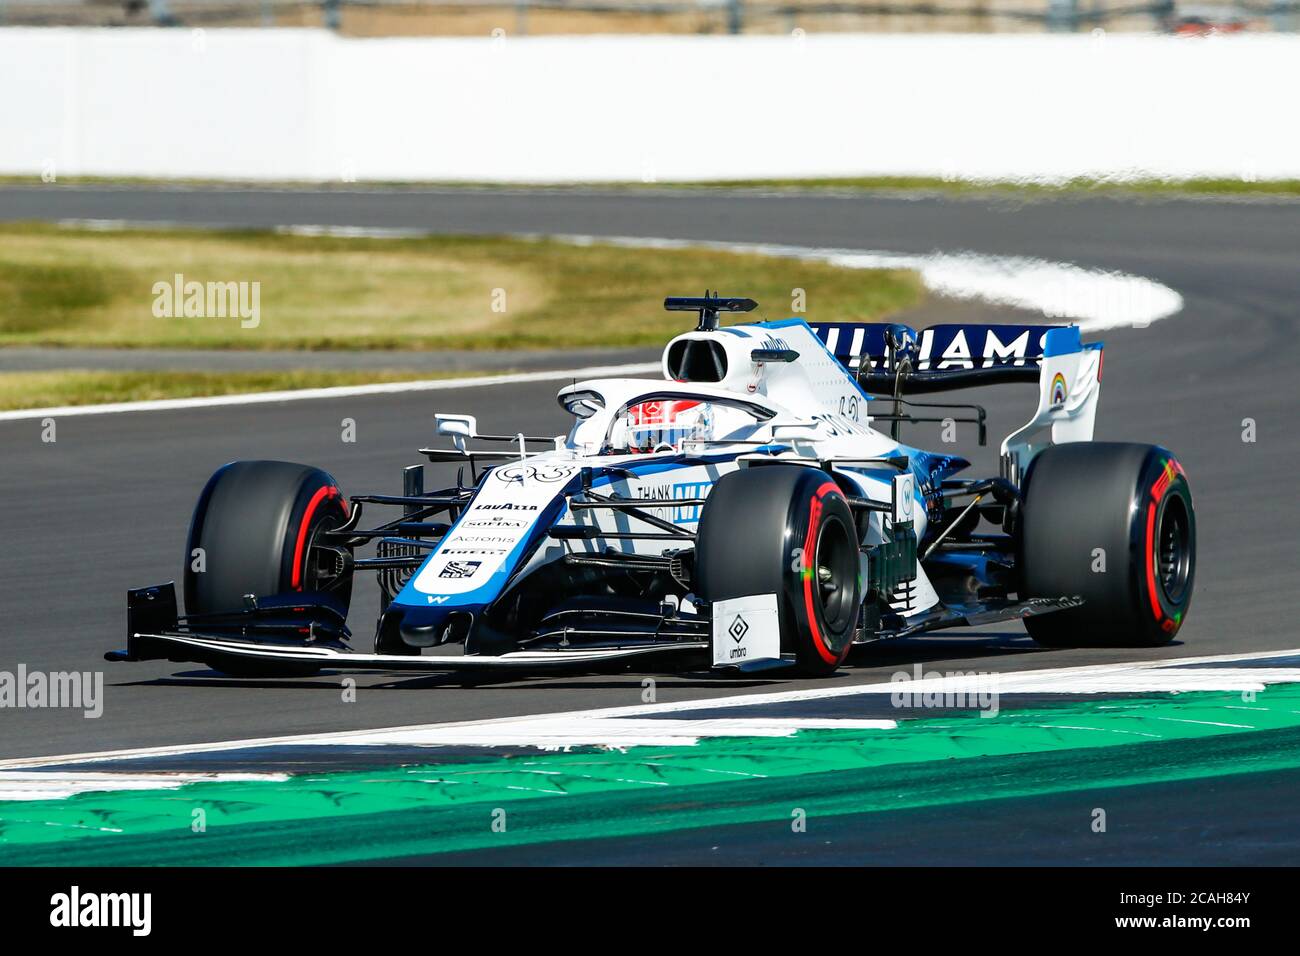 Williams Racing driver George Russell during the first practice session of the 70th Anniversary Formula One Grand Prix at Silverstone Race circuit, Northampton. Stock Photo